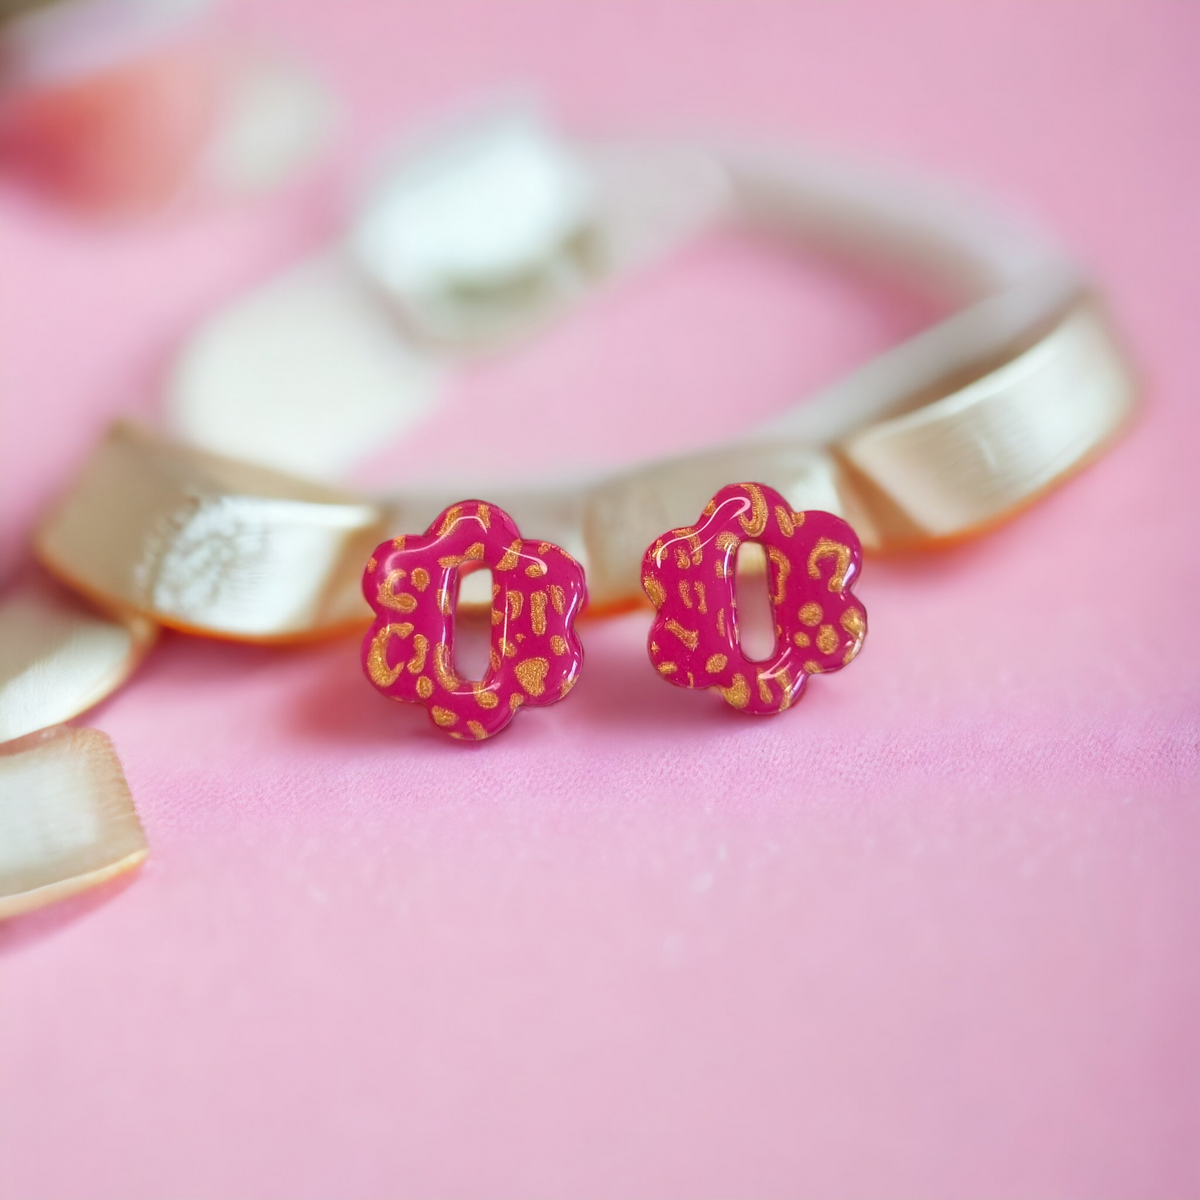 Statement Stud Flower Bright Pink and Gold Leopard Pattern Earrings